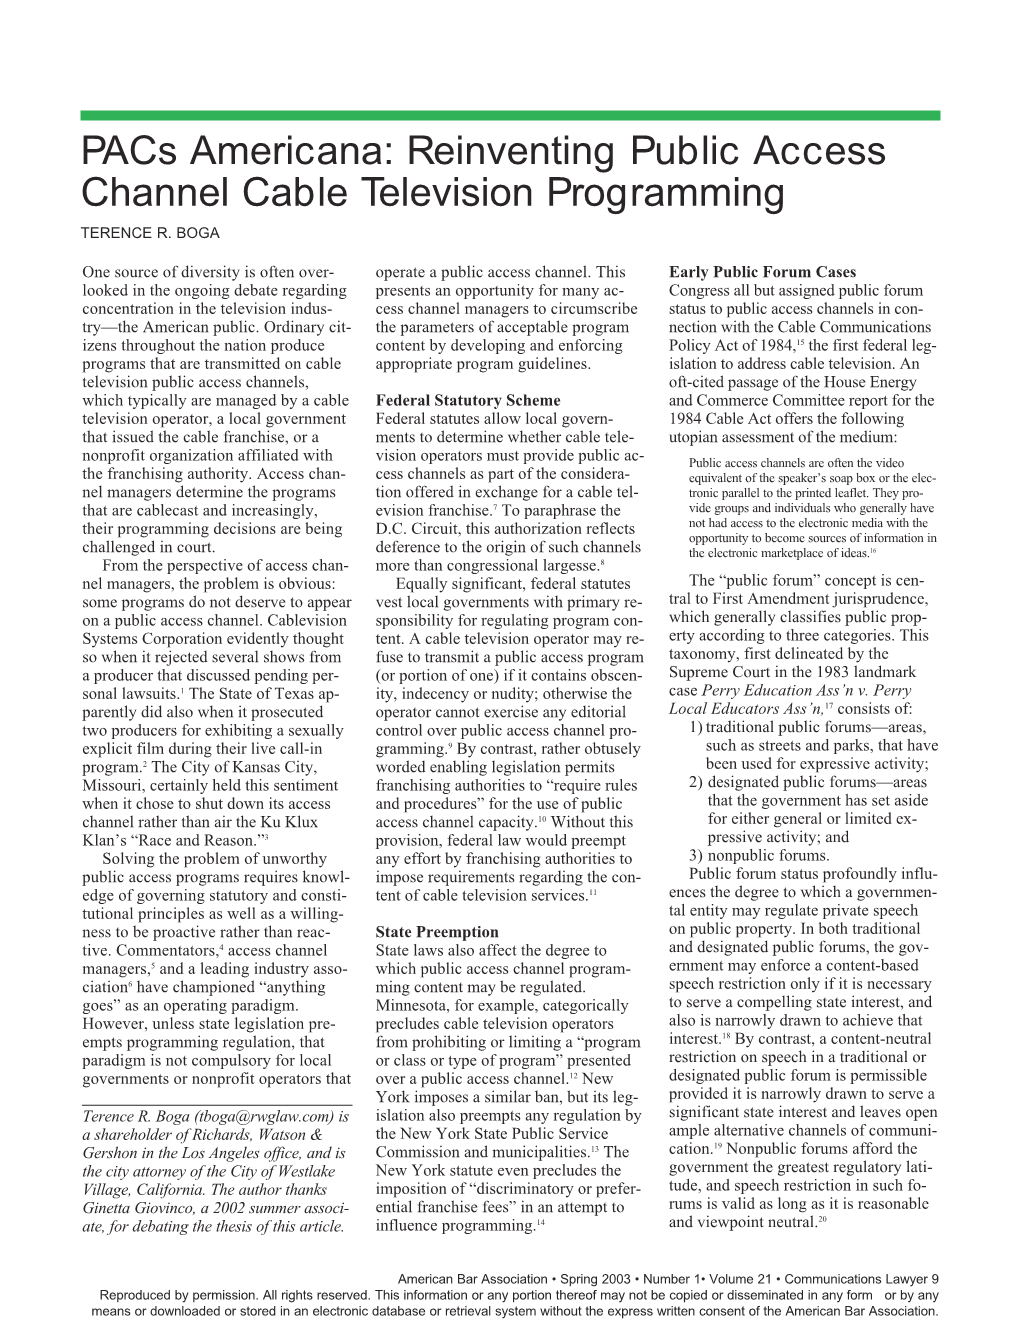 Reinventing Public Access Channel Cable Television Programming TERENCE R